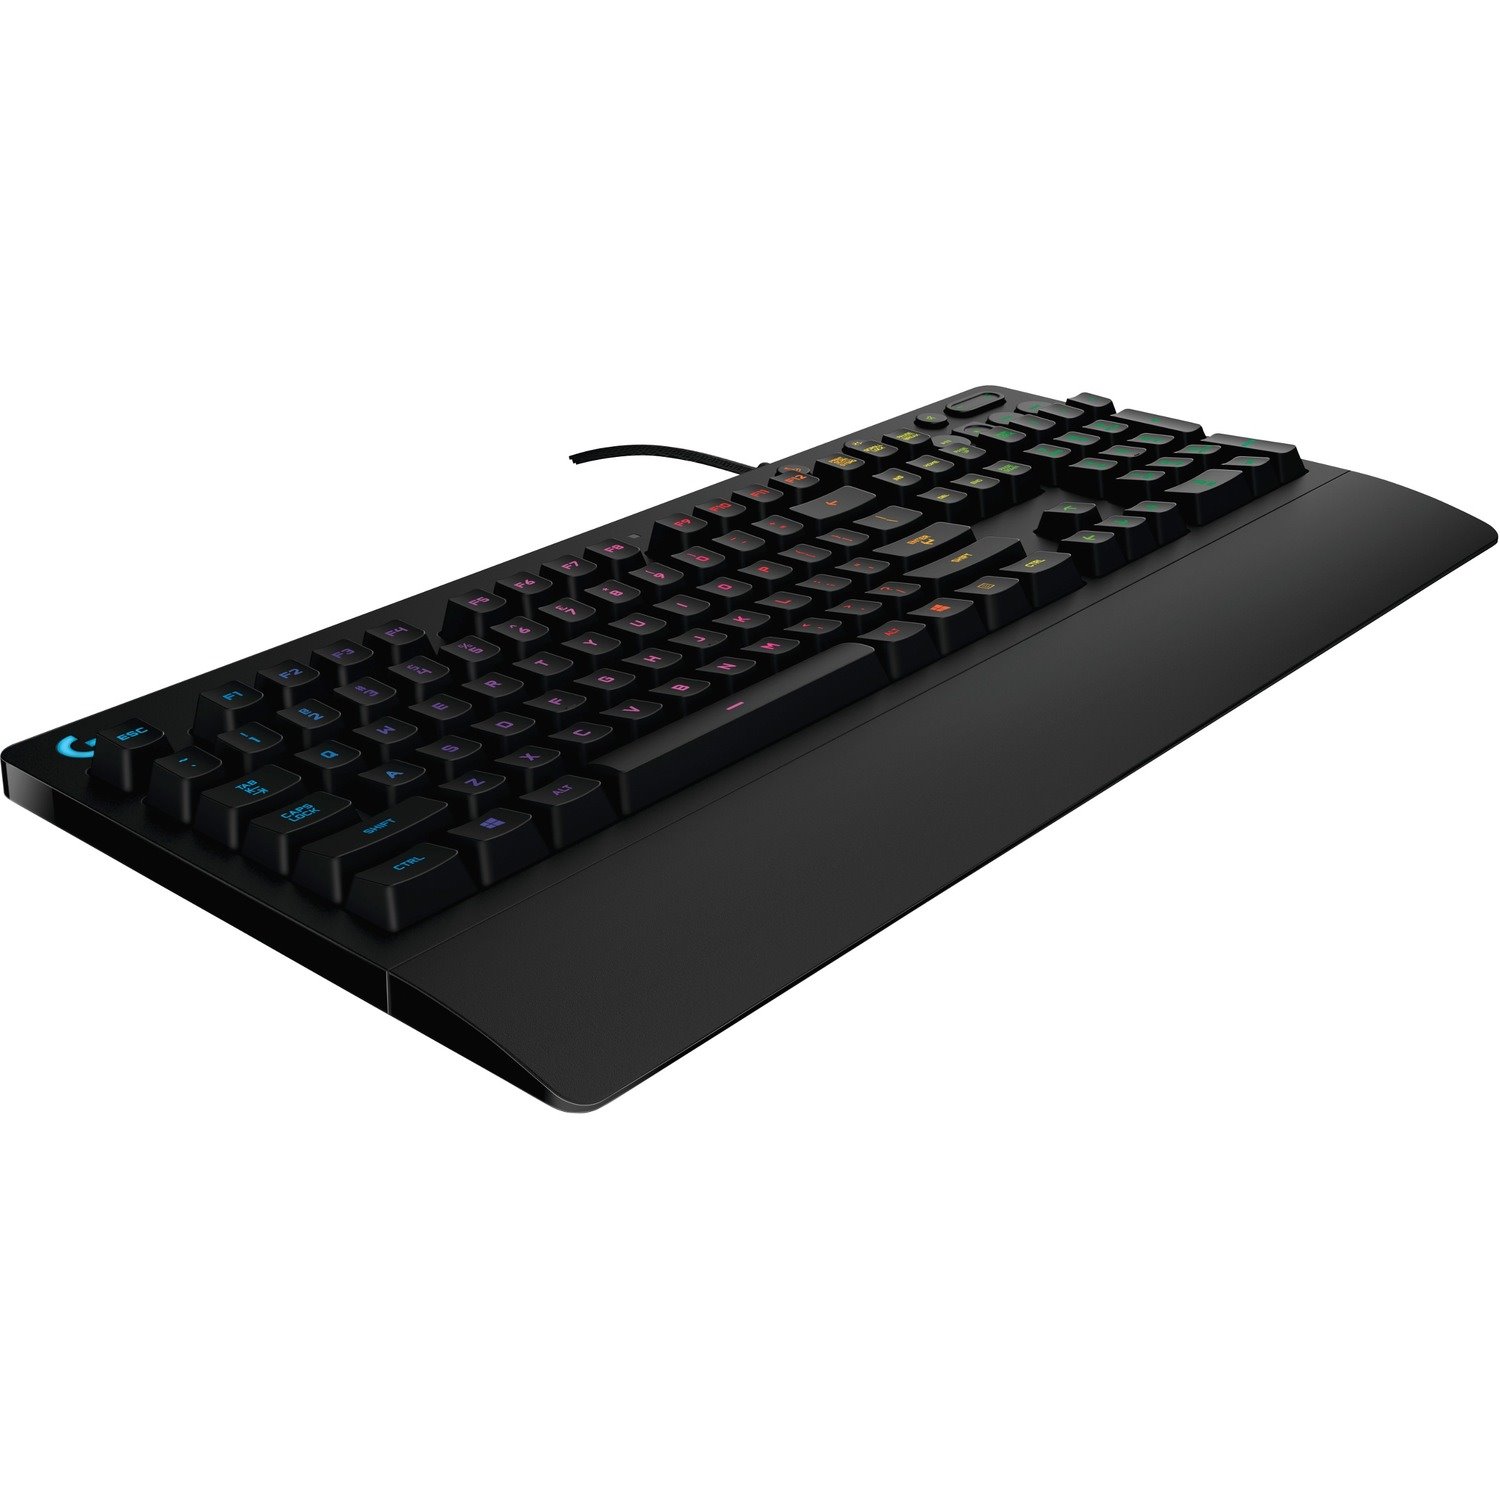 Logitech G213 Keyboard - Cable Connectivity - USB Interface